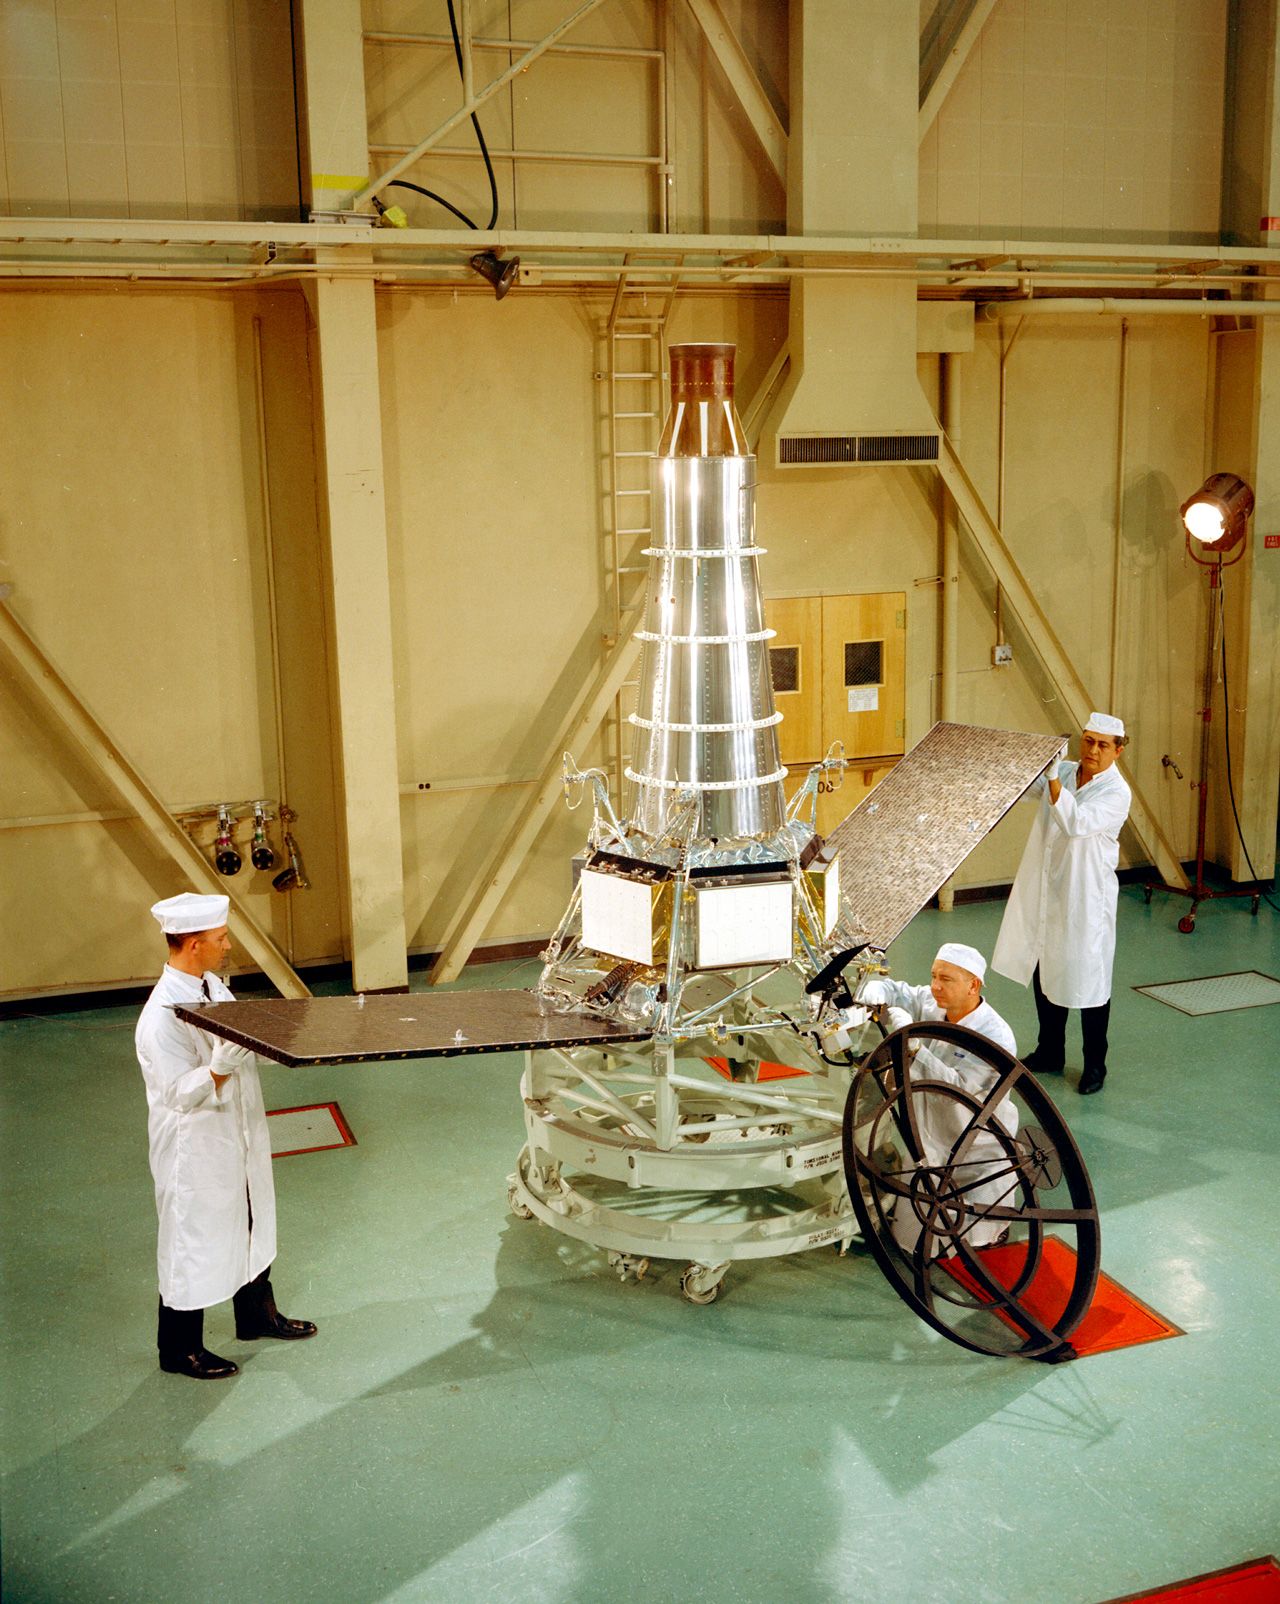 Three engineers working on a spacecraft.